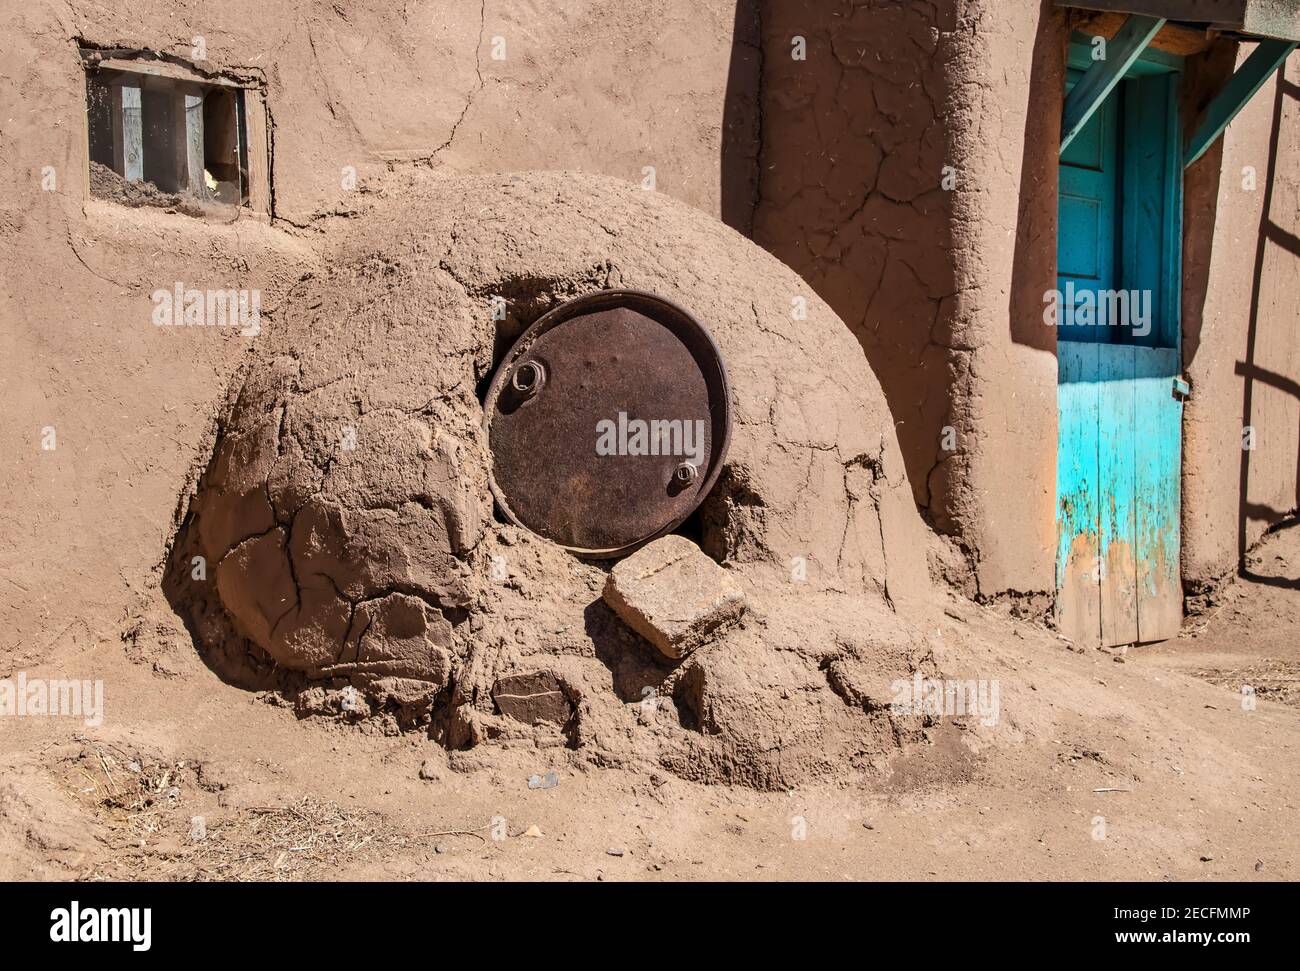 Horno - mud adobe outdoor oven in Southwestern US Pueblo community with old metal barrel top protecting the opening - common in all Spanish-occupied l Stock Photo